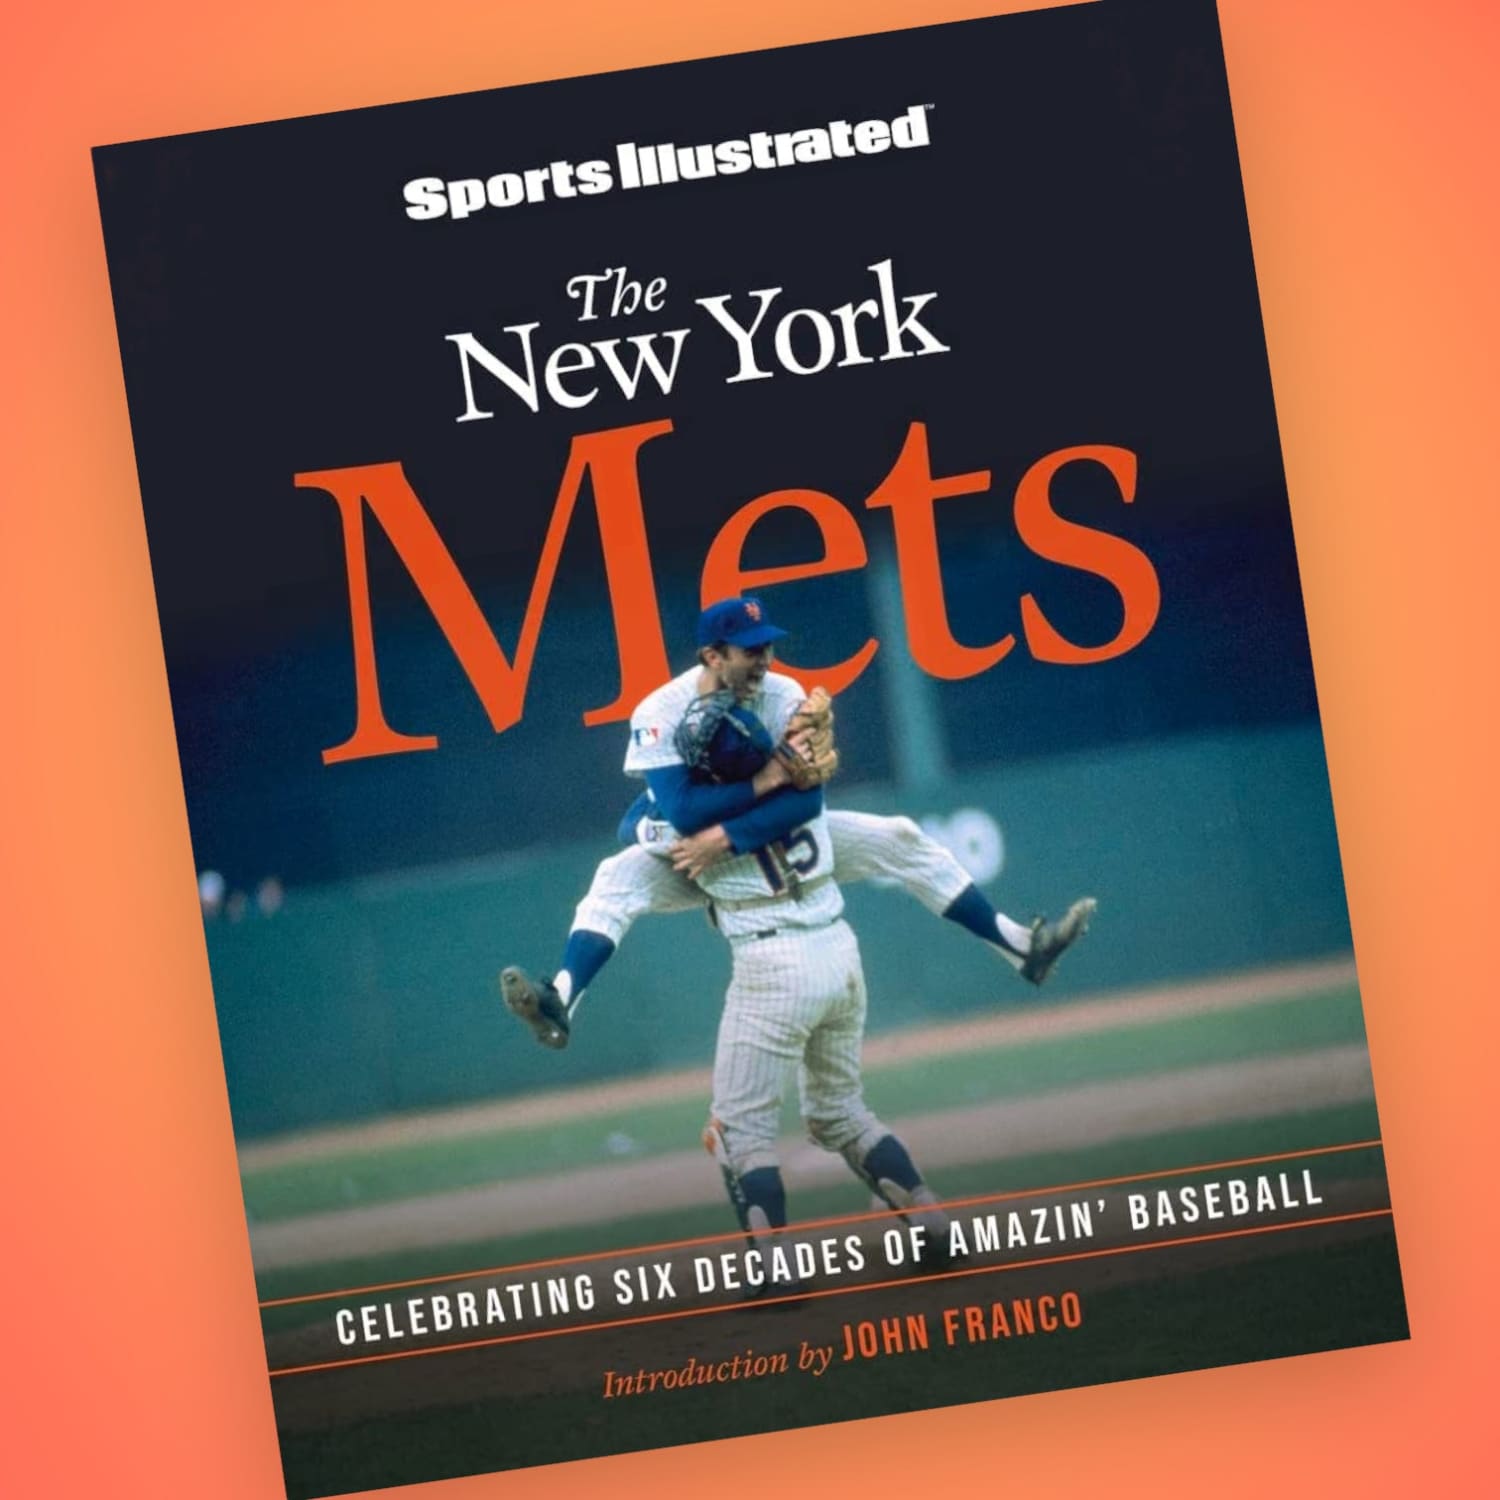 New York Mets - Check out this photo as the 1969 Mets took the